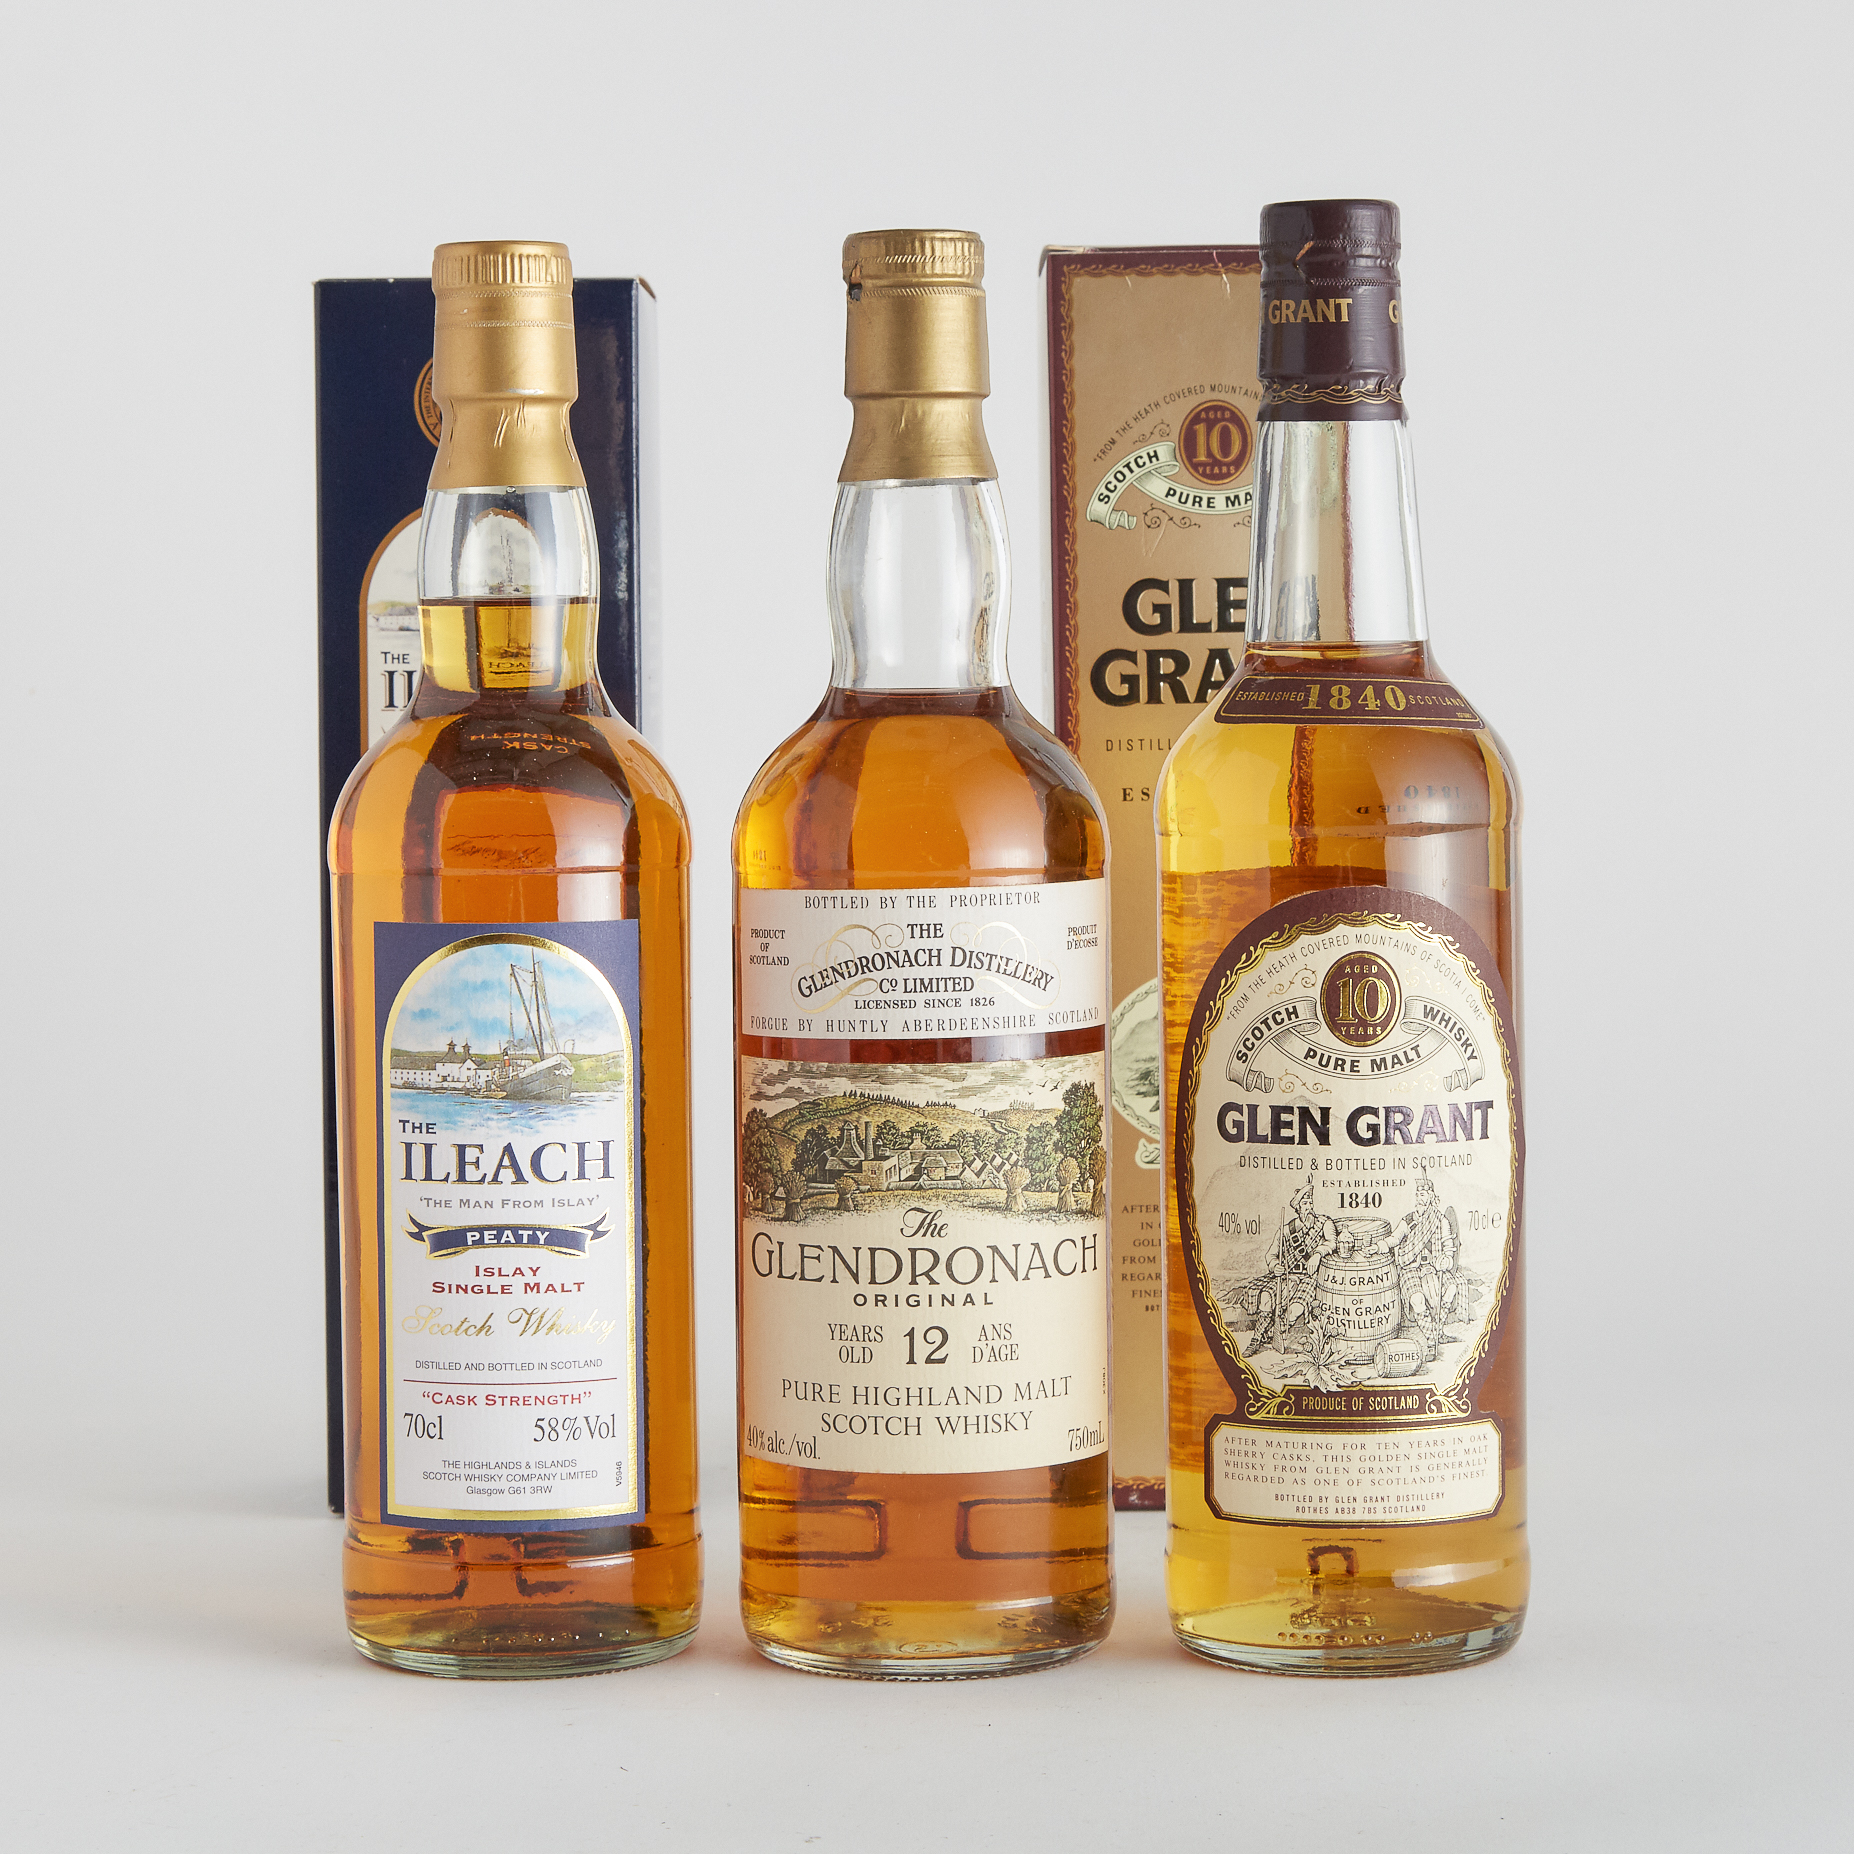 GLEN GRANT PURE MALT SCOTCH WHISKY 10 YEARS (ONE 70 CL)
GLENDRONACH PURE HIGHLAND MALT SCOTCH WHISKY 12 YEARS (ONE 750 ML)
ILEACH ISLAY SINGLE MALT SCOTCH WHISKY (ONE 70 CL)